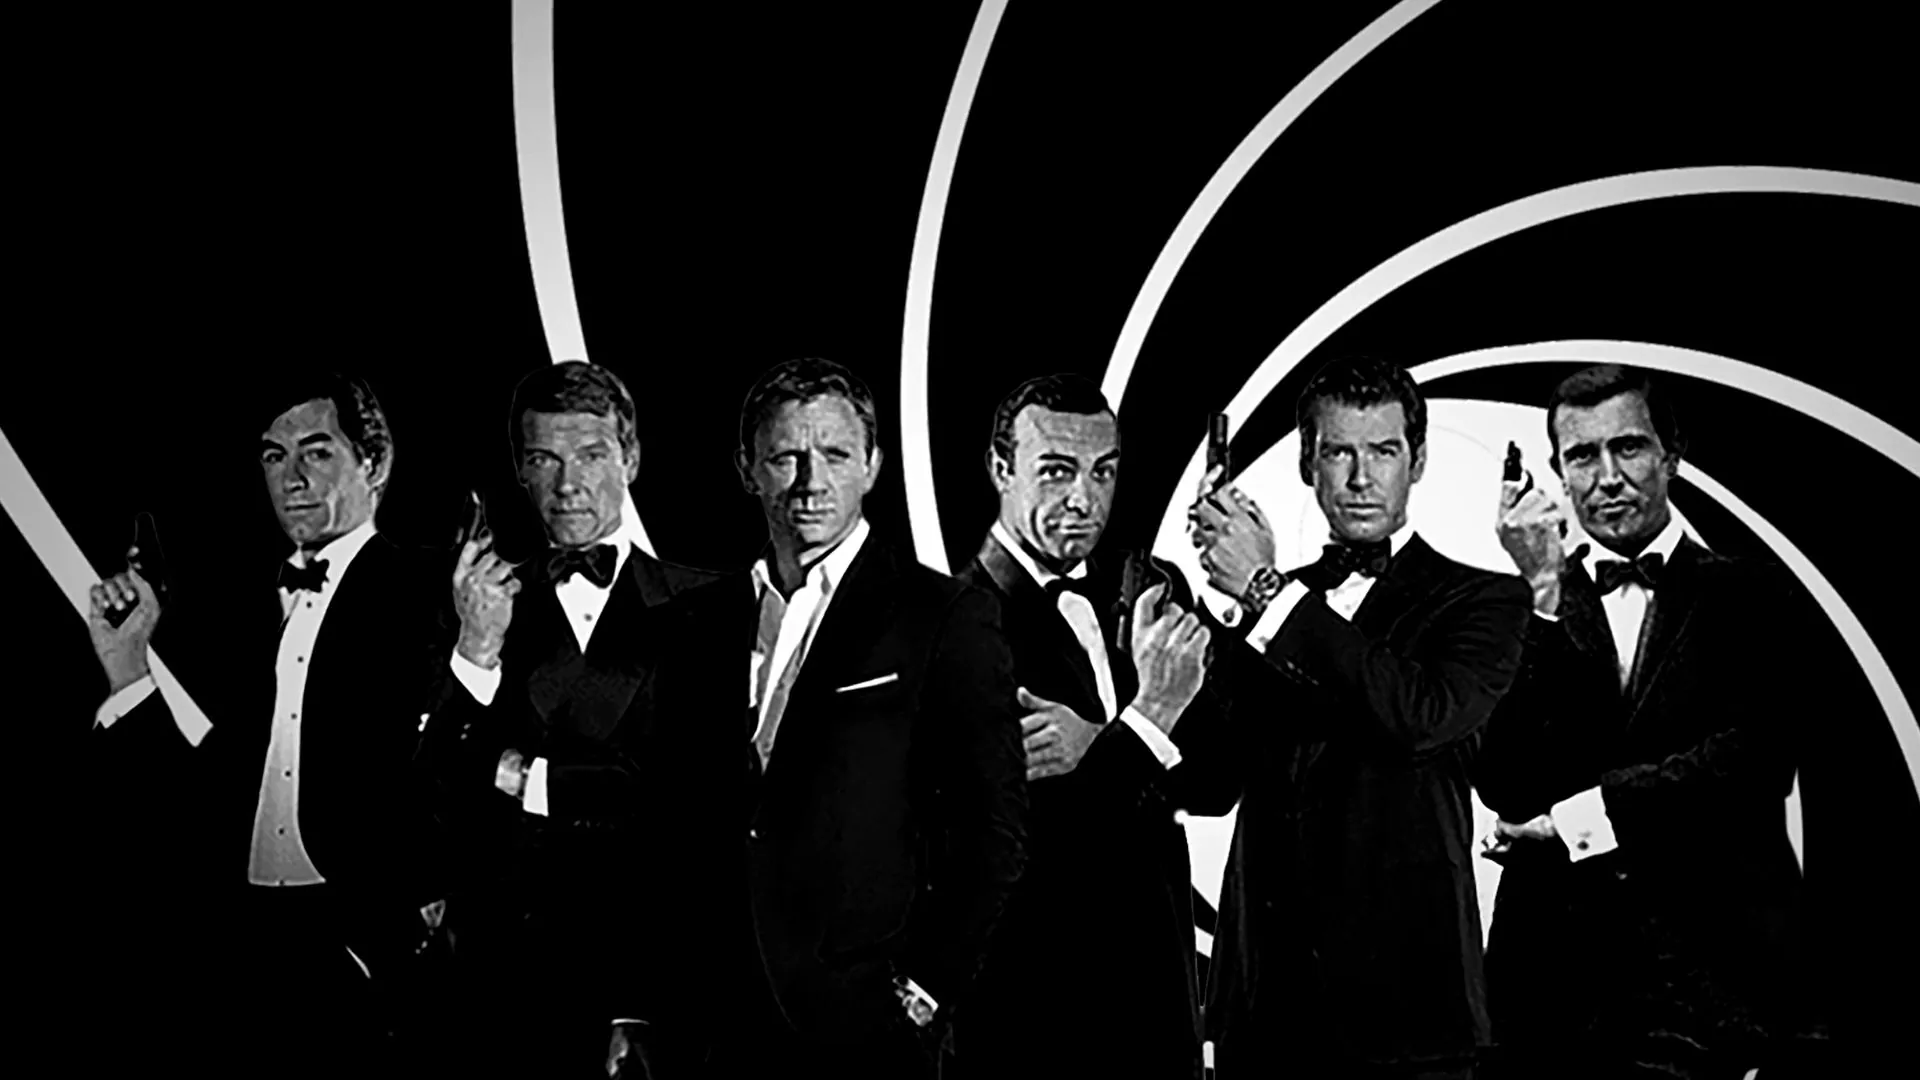 The Full James Bond Catalogue Is Coming To Prime Video in October. (1)